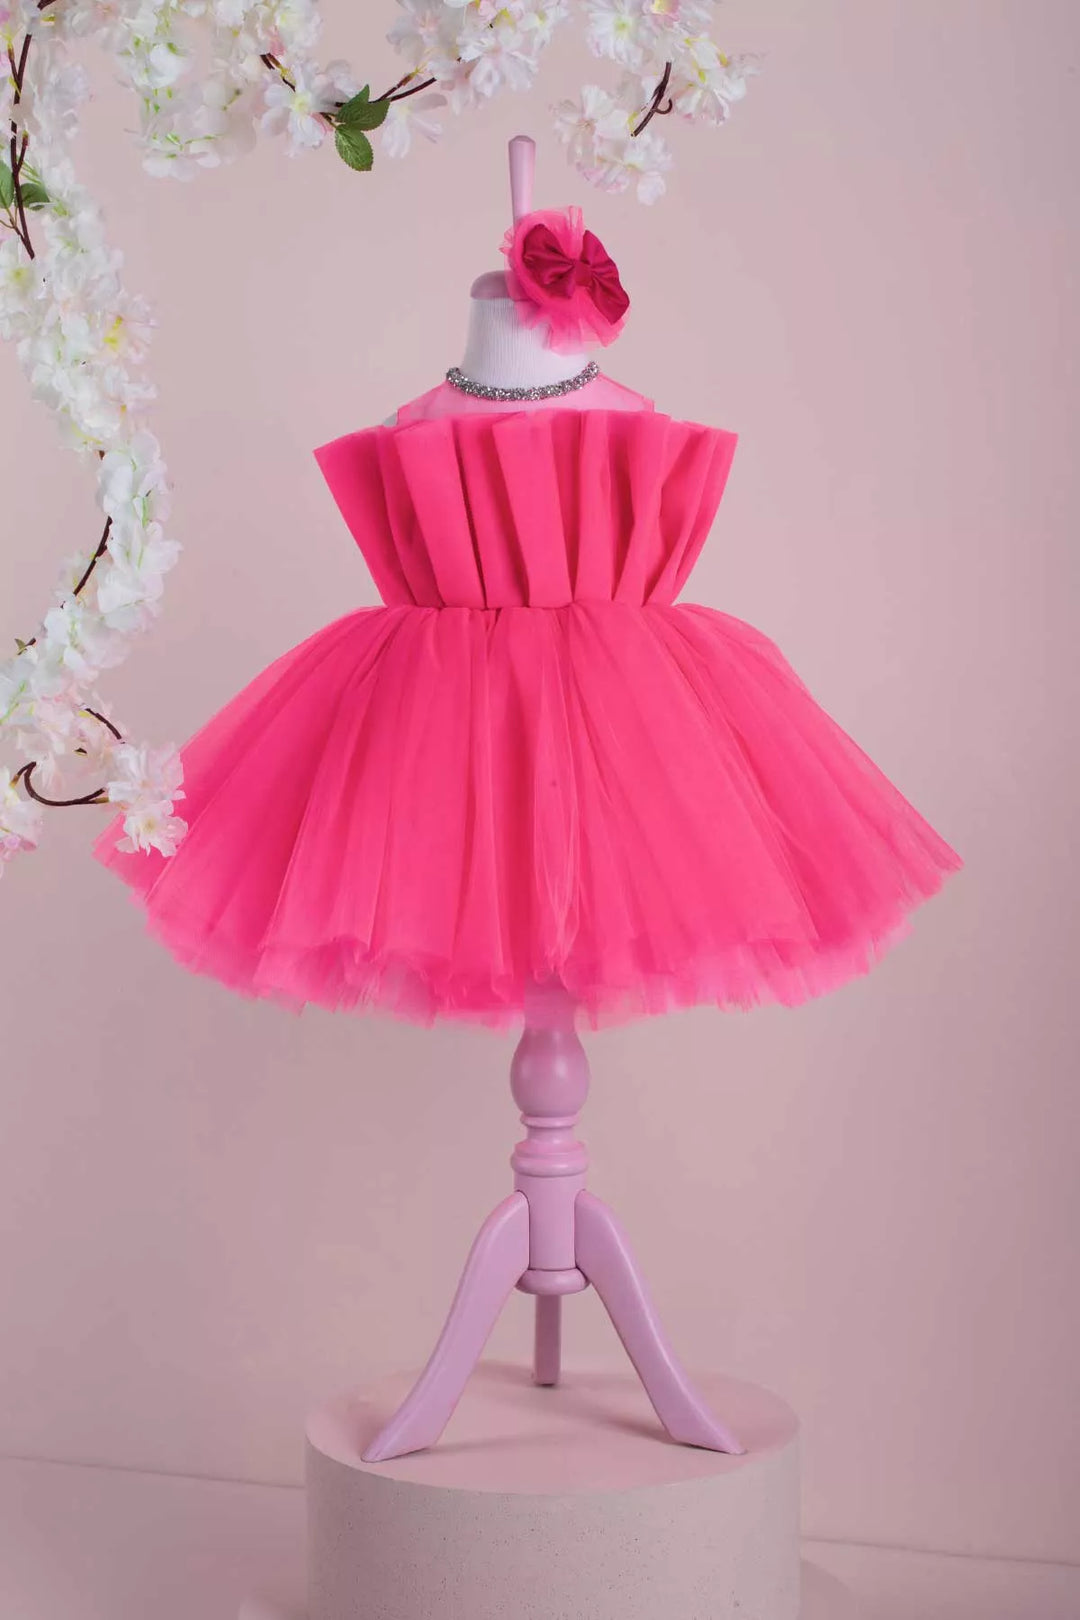 Hot pink party dress